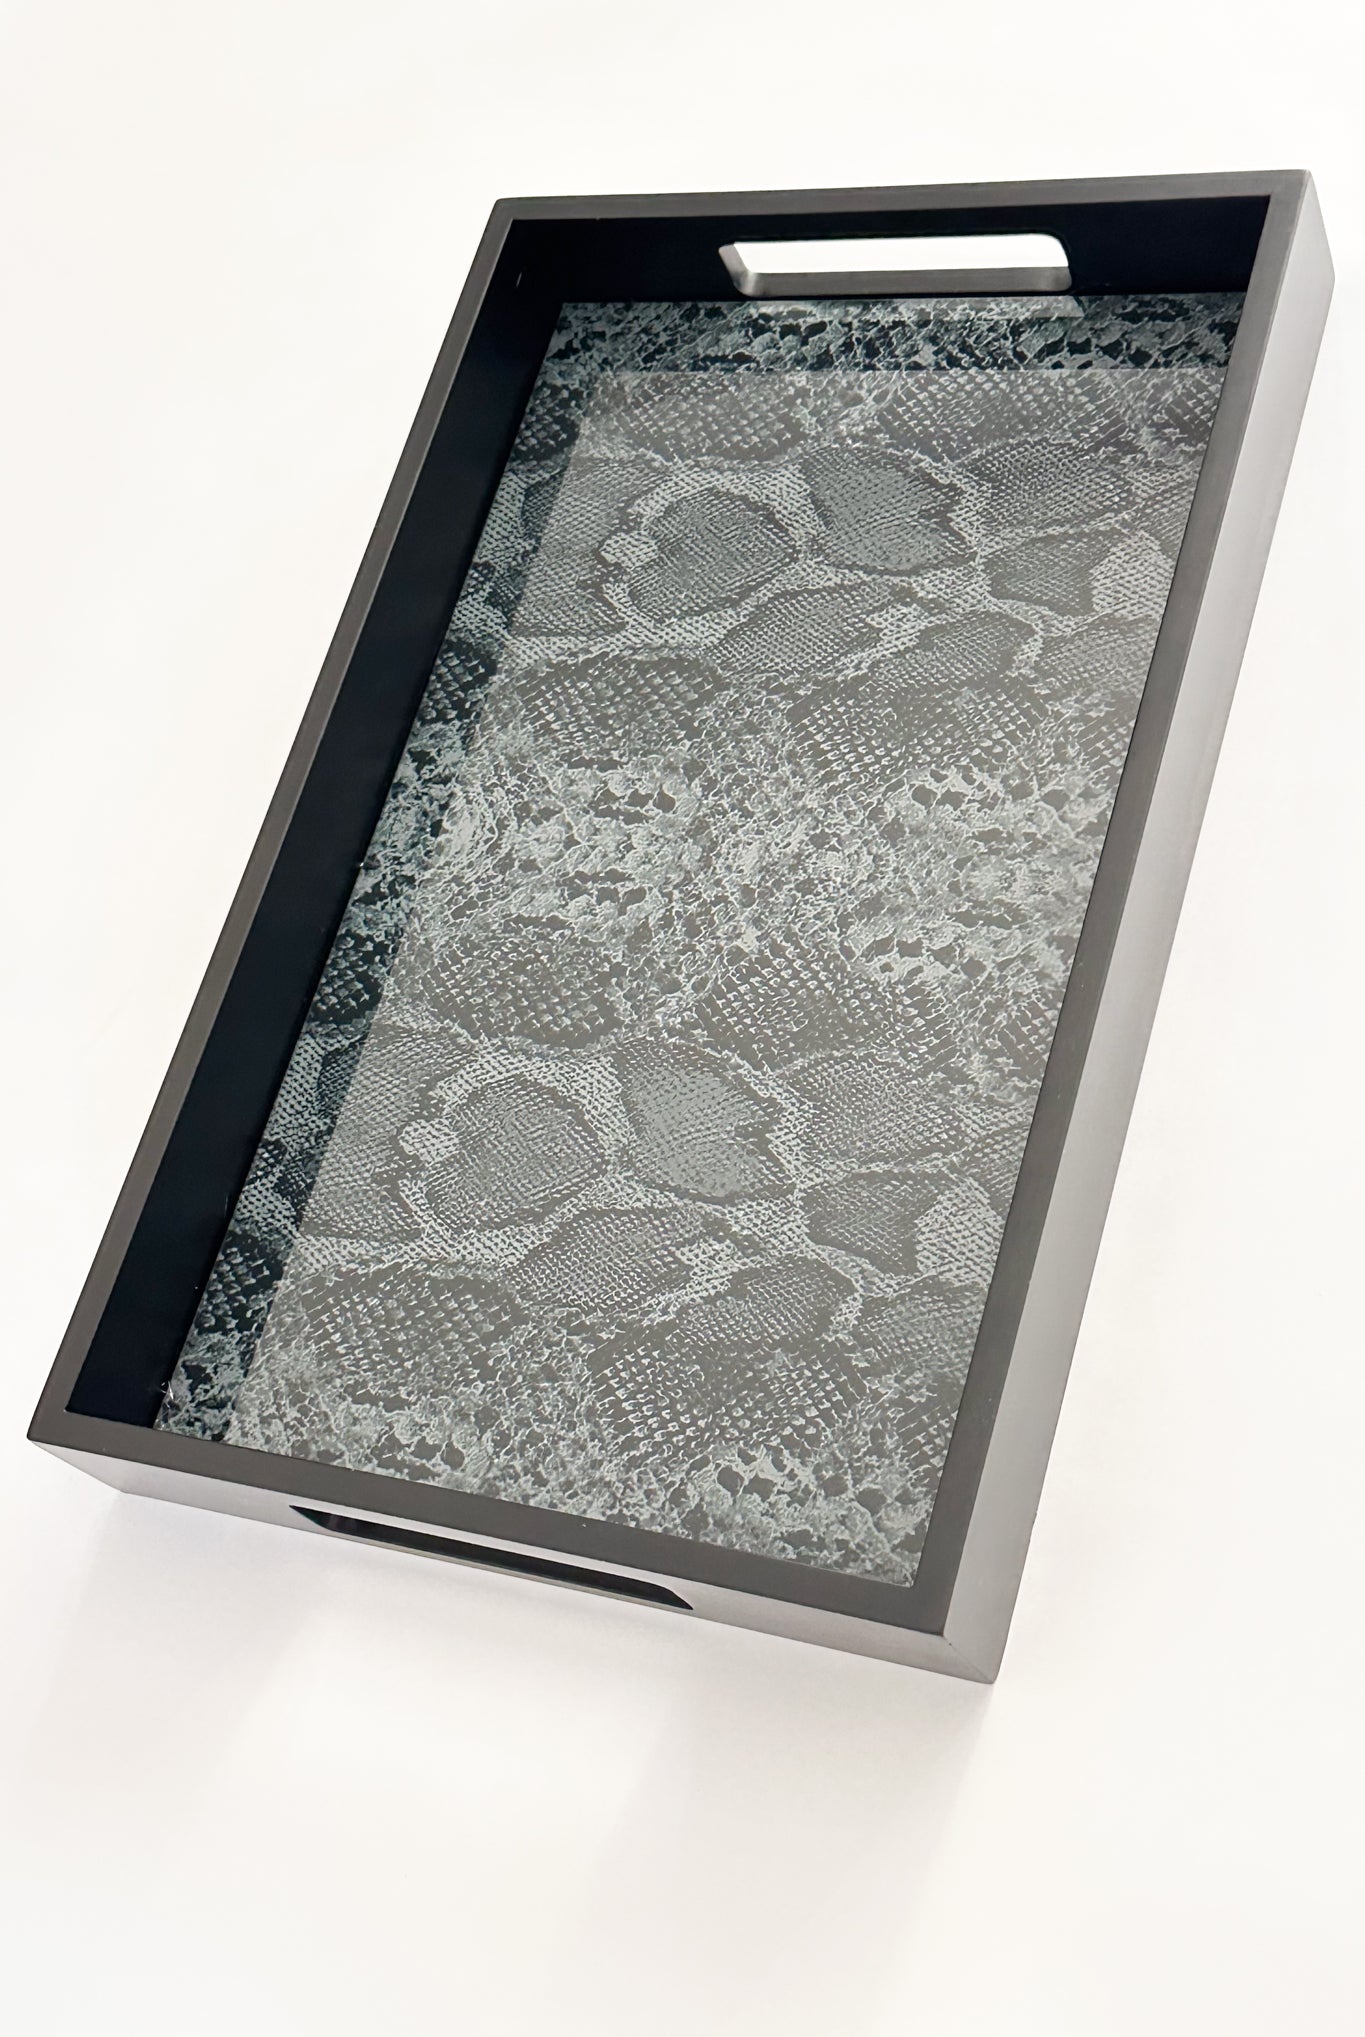 Snake Patterned Tray - Magpie Style